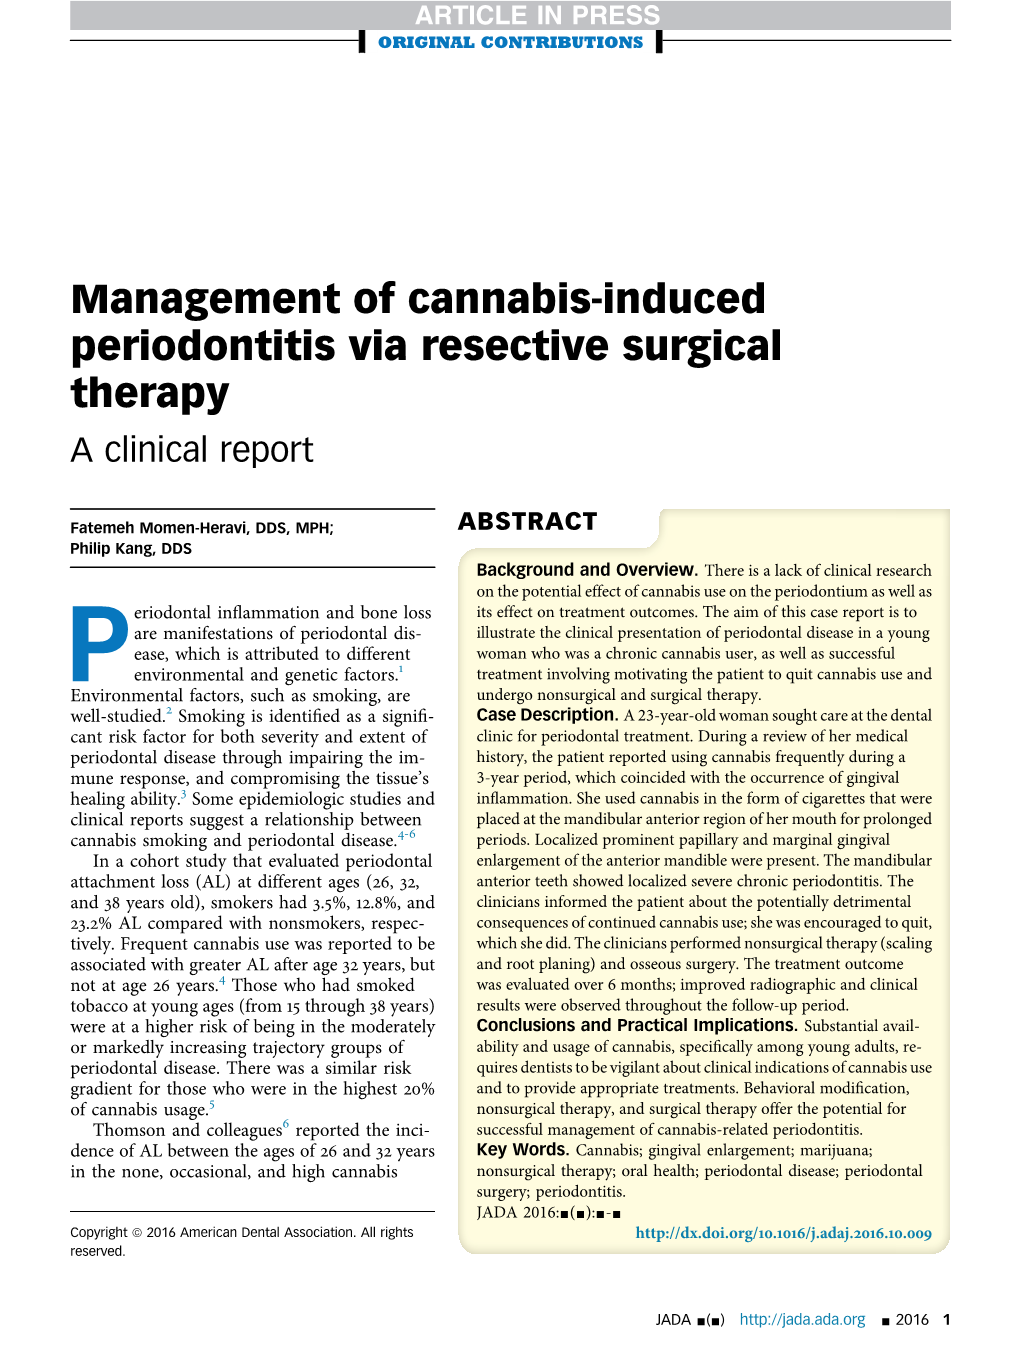 Management of Cannabis-Induced Periodontitis Via Resective Surgical Therapy a Clinical Report